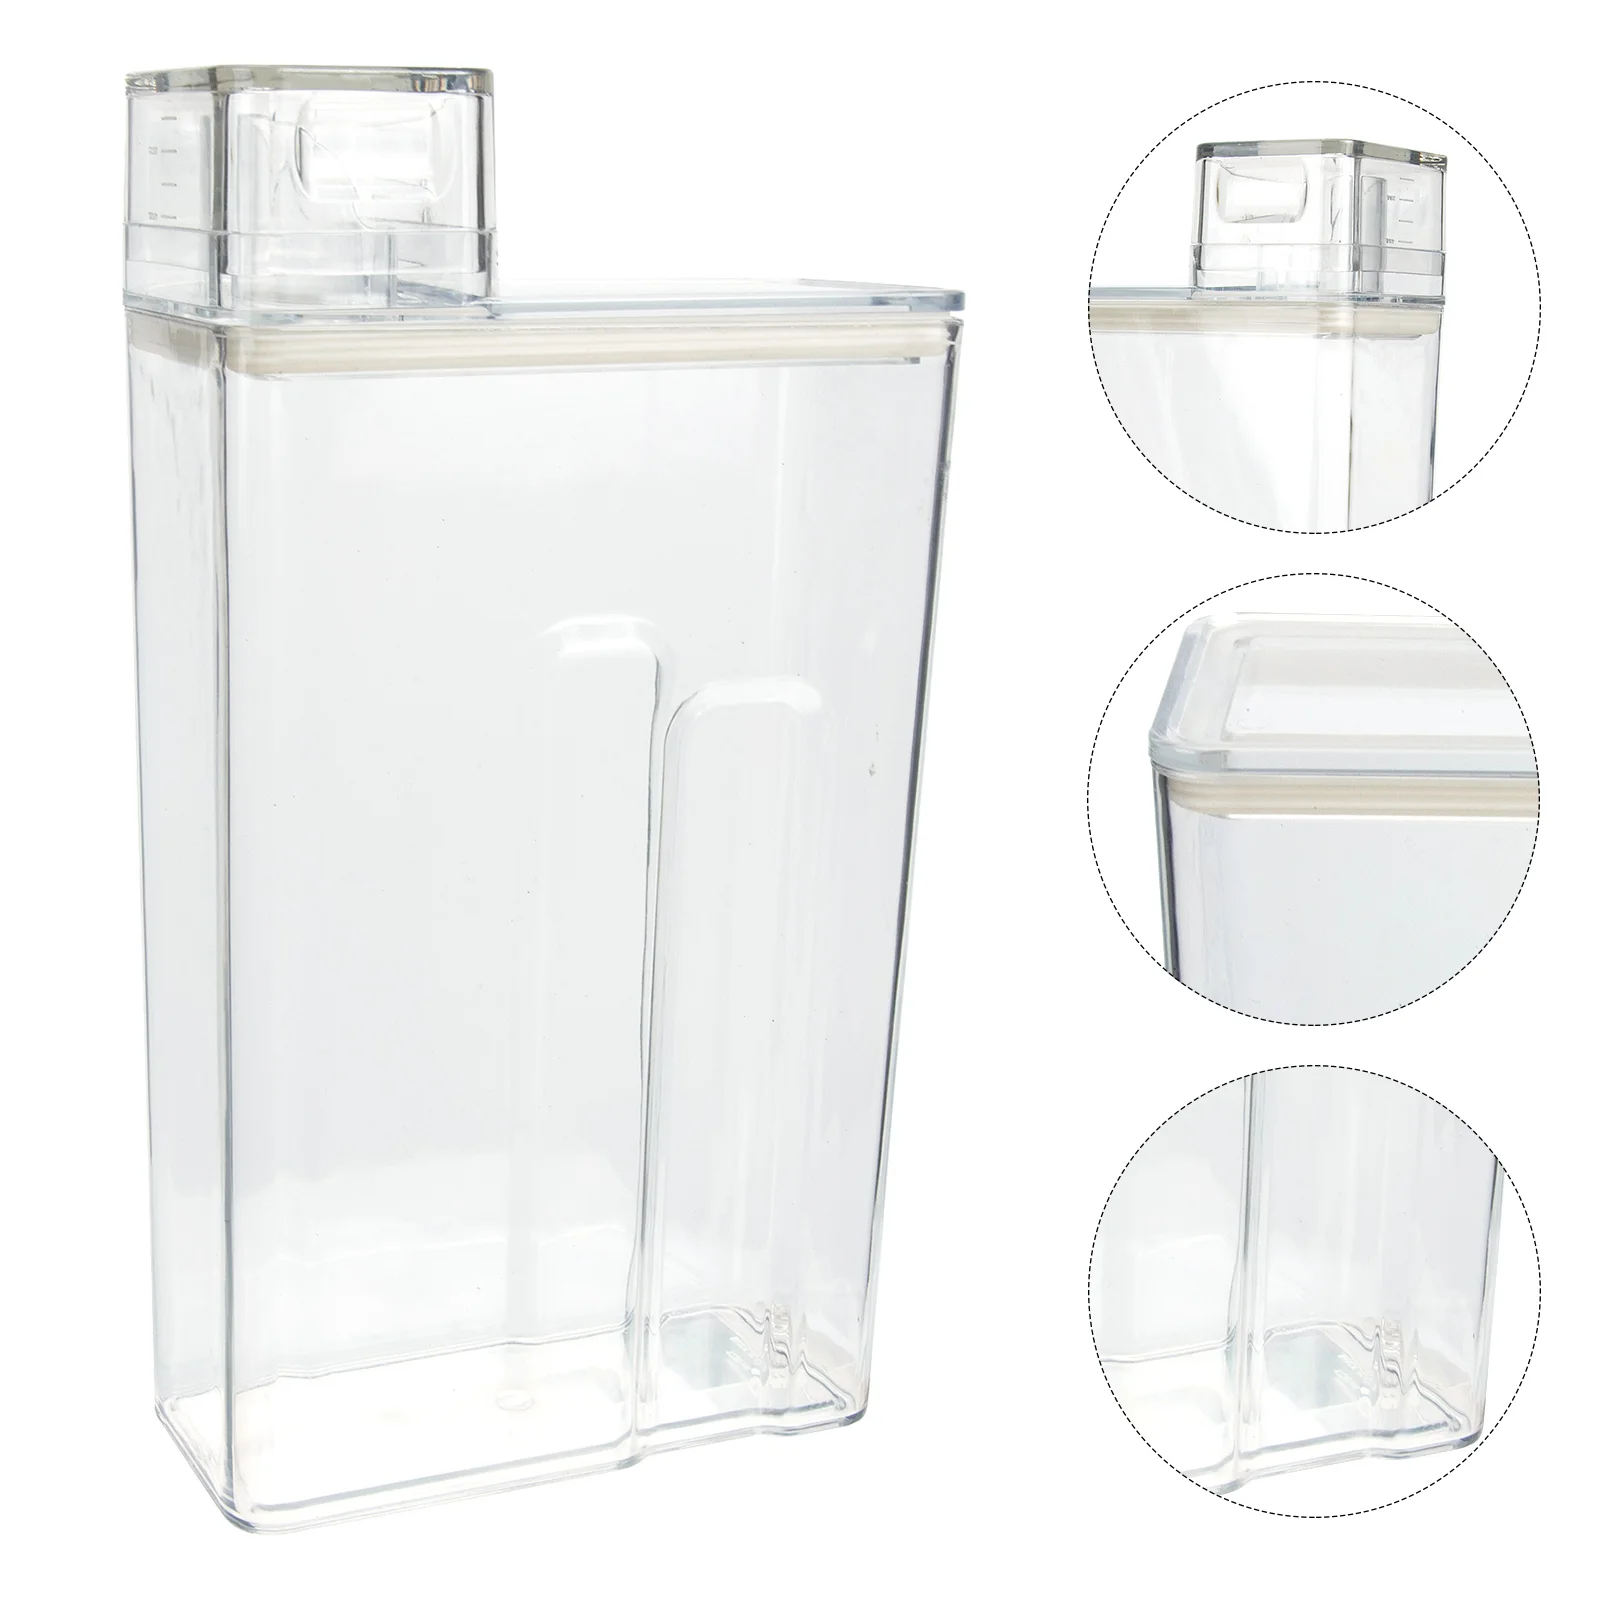 

Laundry Detergent Storage Box Glass Food Containers Sub Bottle Refillable Lotion Holder Powder The Pet Bottles Travel Washing